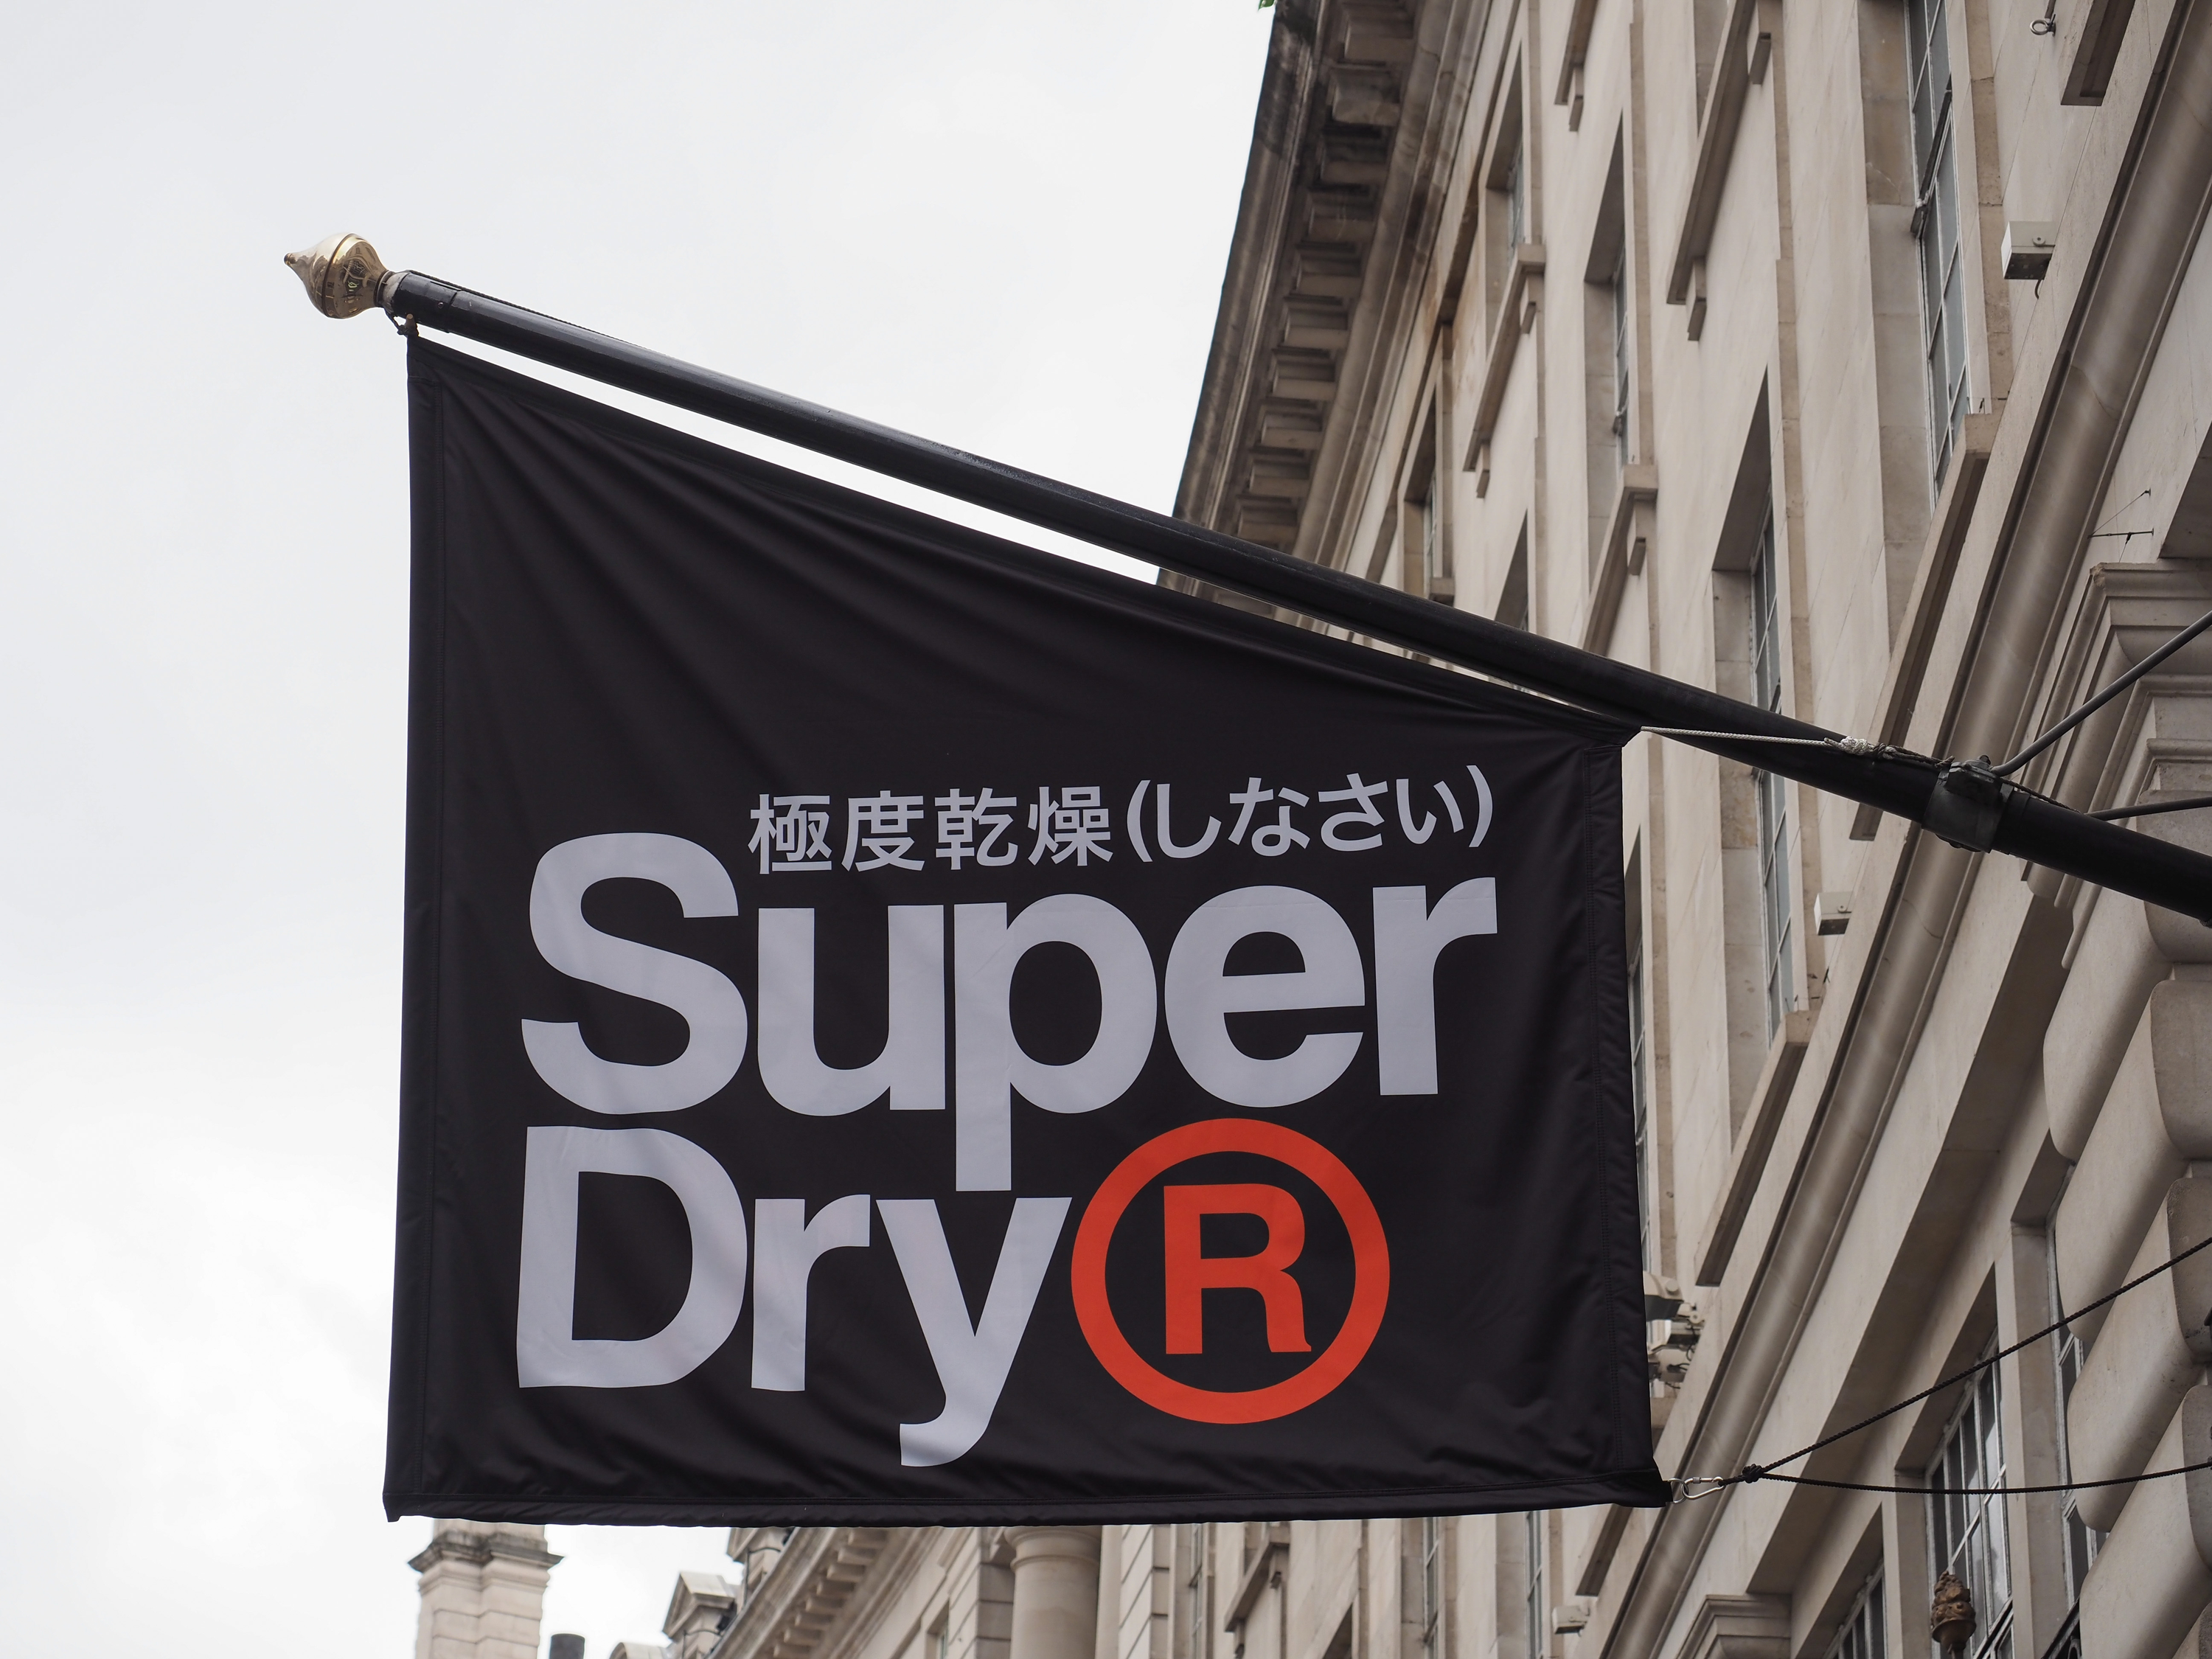 Revenues have fallen at clothing brand Superdry